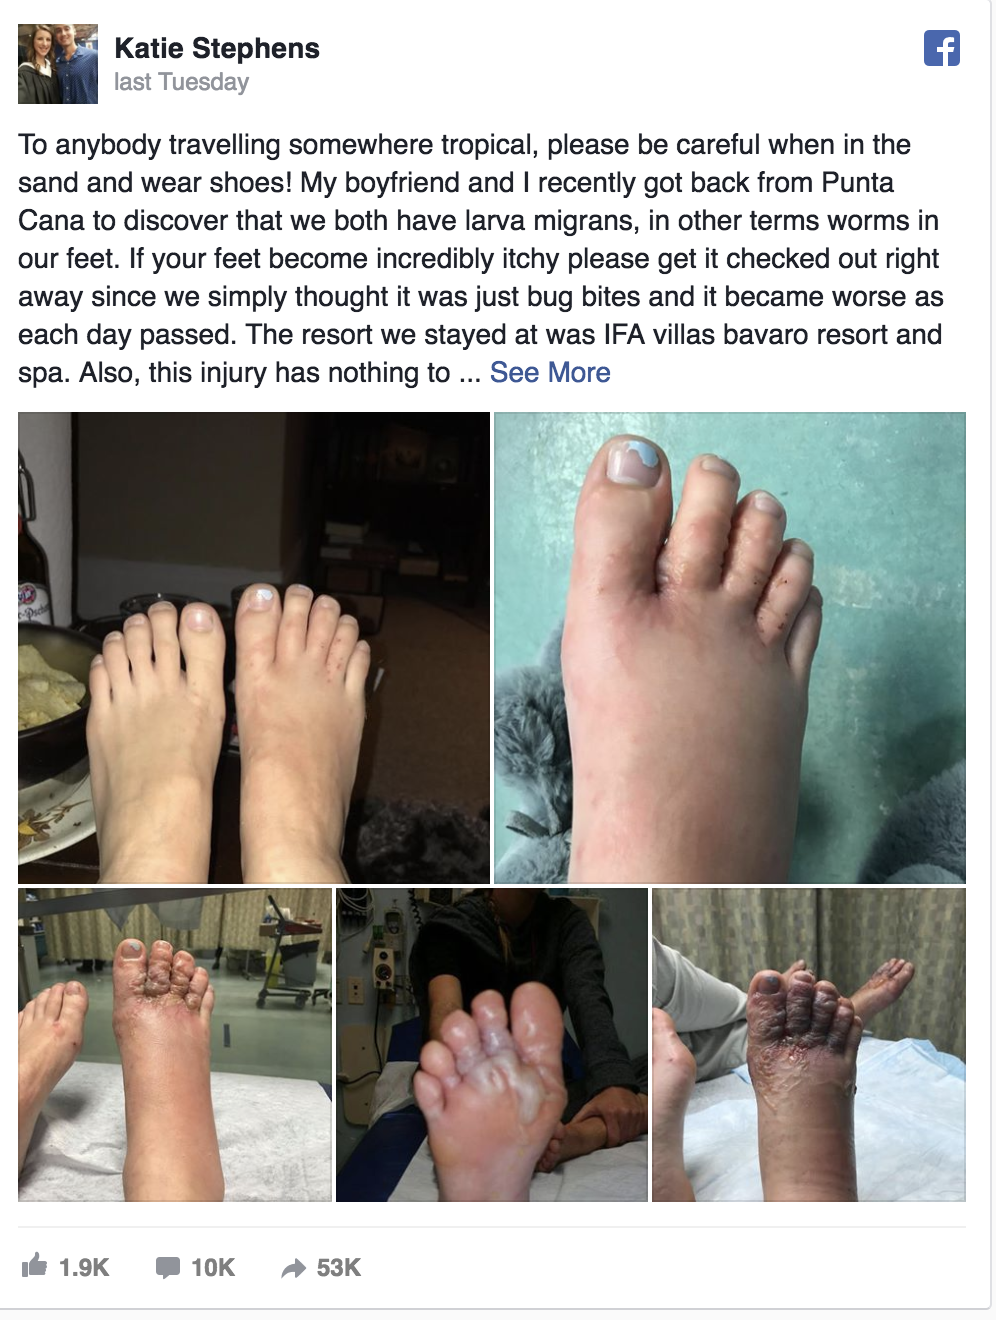 Couple contract parasitic hookworm in feet after walking on Punta Cana beach